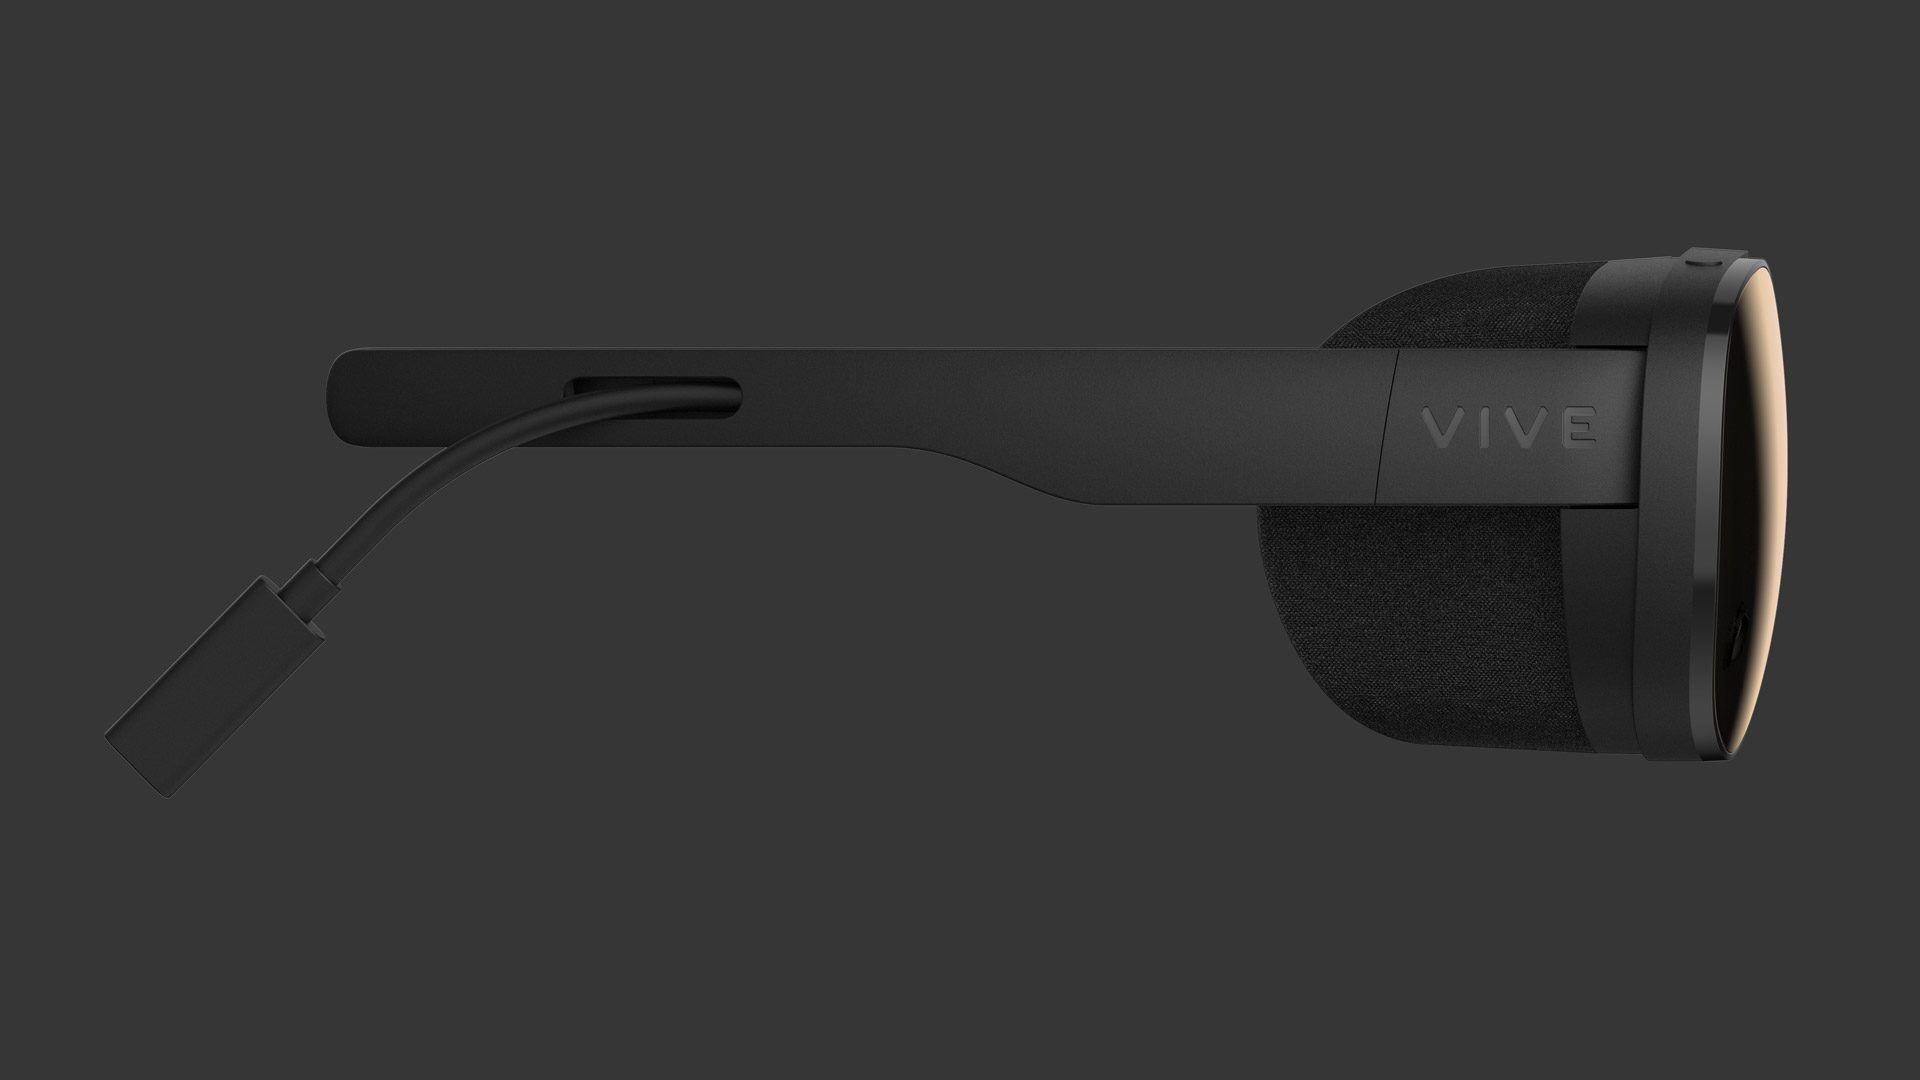 HTC 'Looking Into' iPhone And Laptop Support For Vive Flow